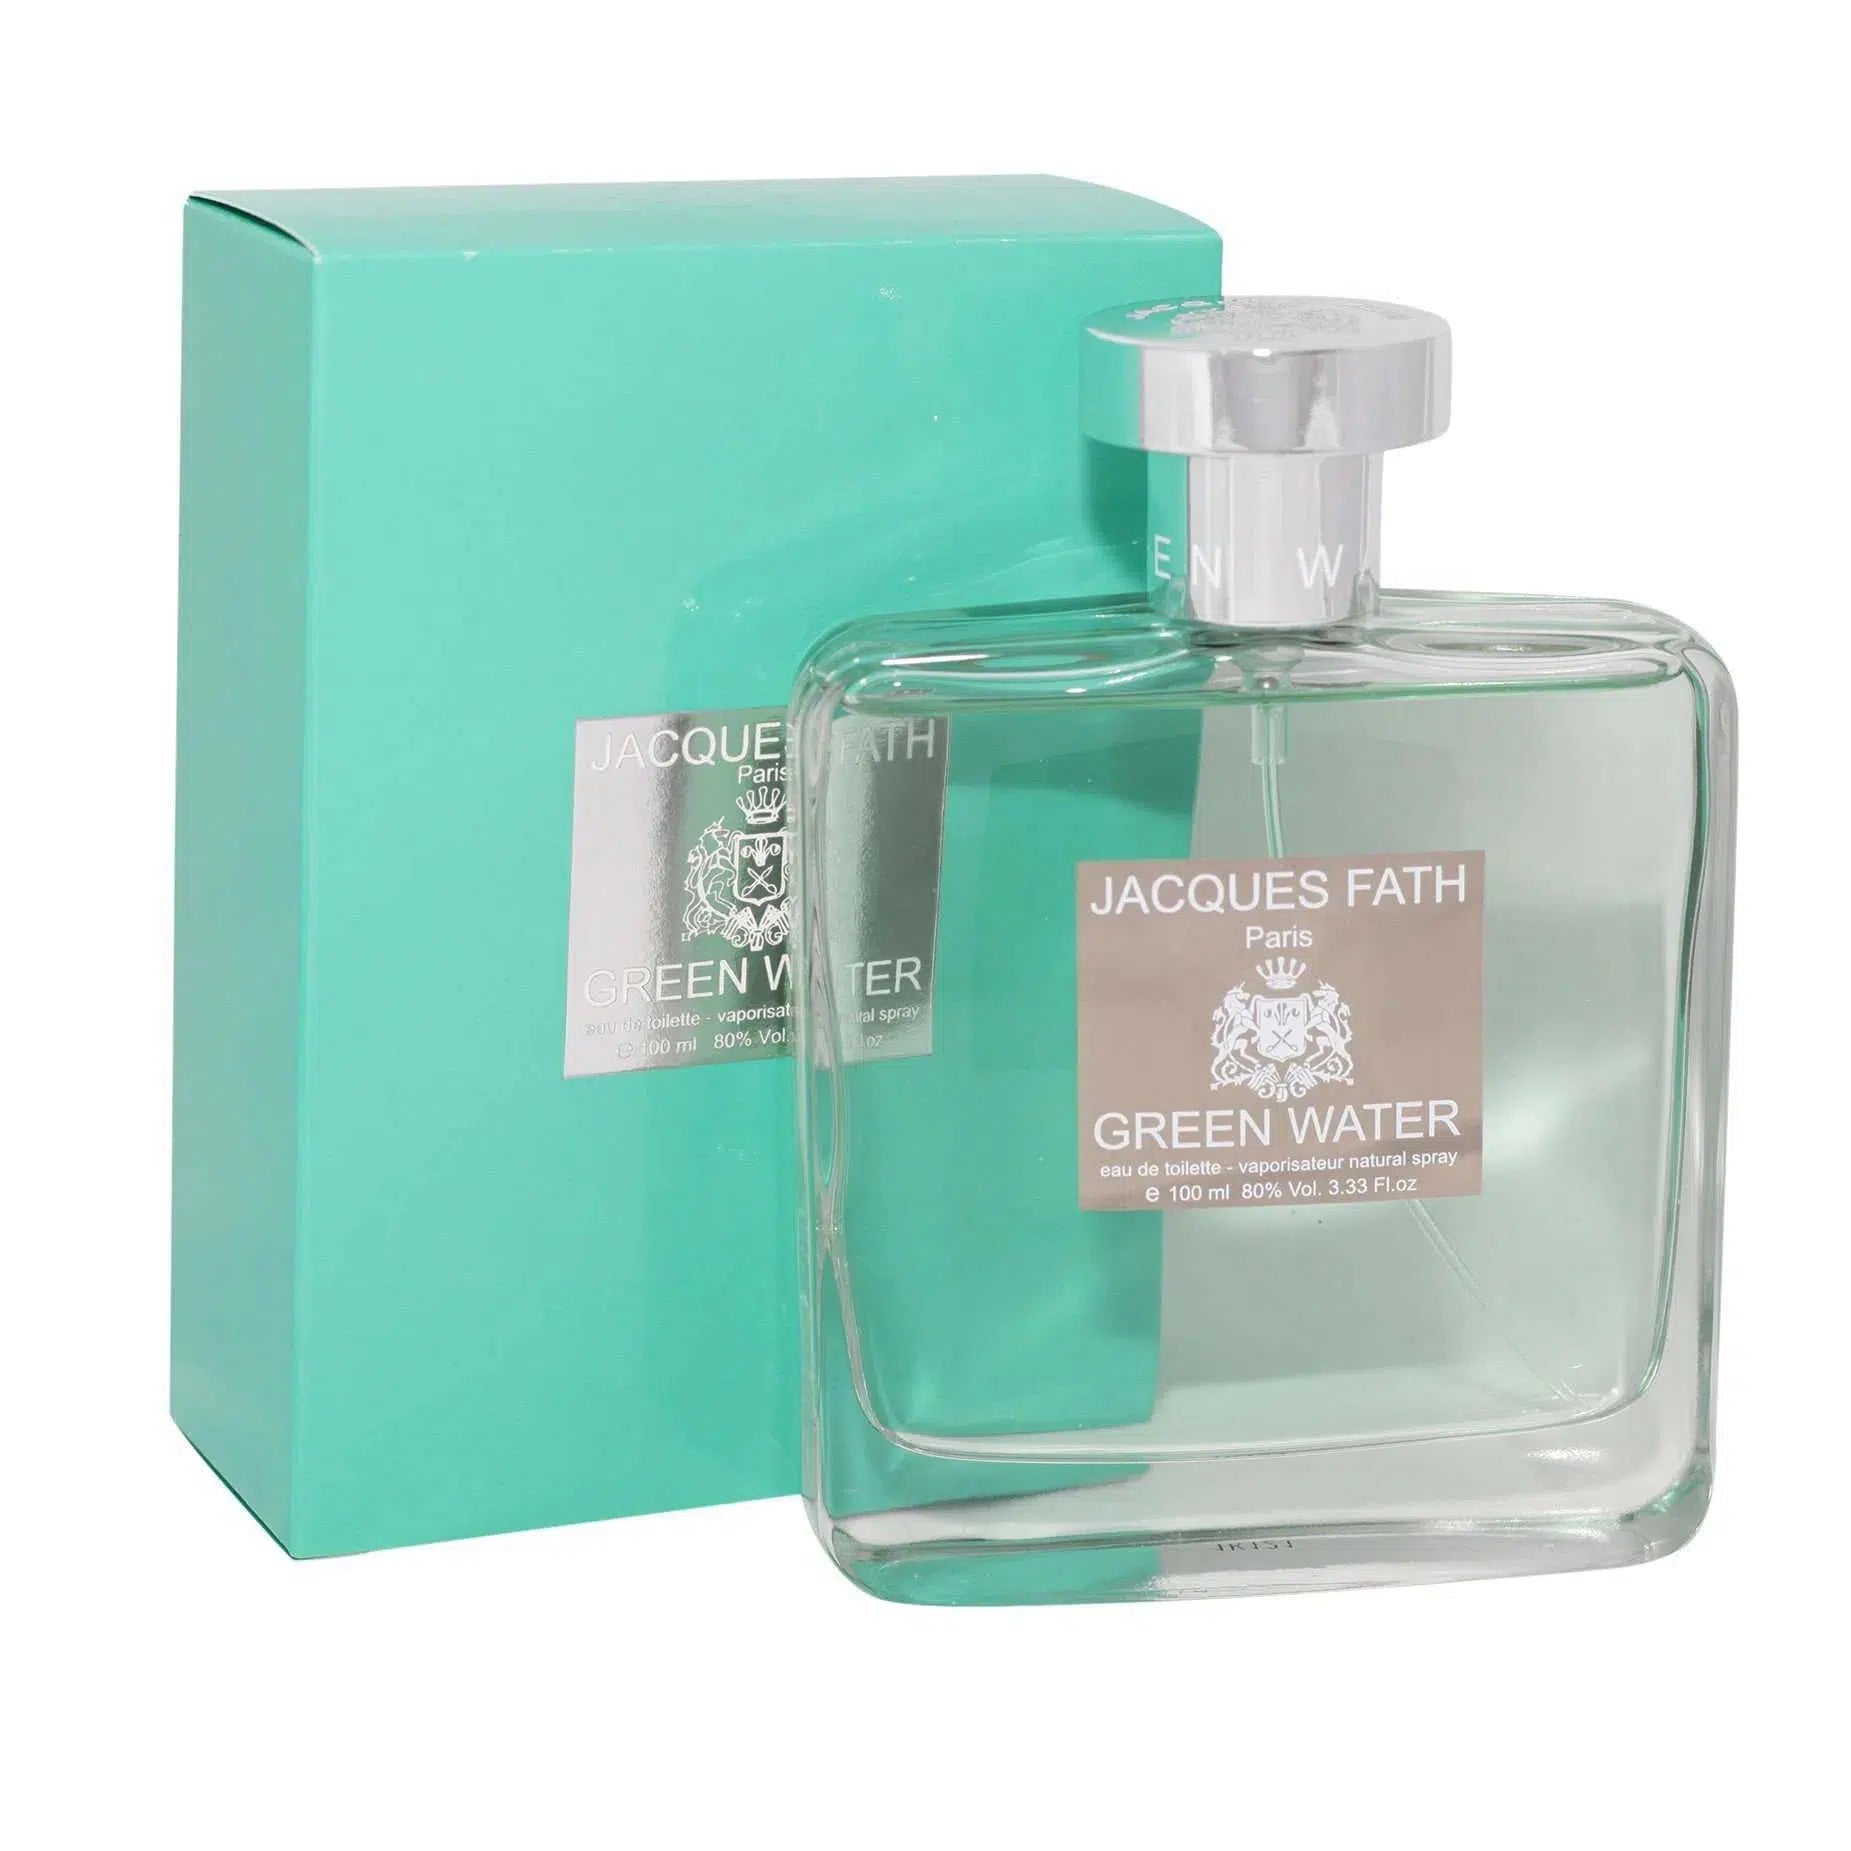 Jaqcques Fath Green Water 100ml - Perfume Philippines